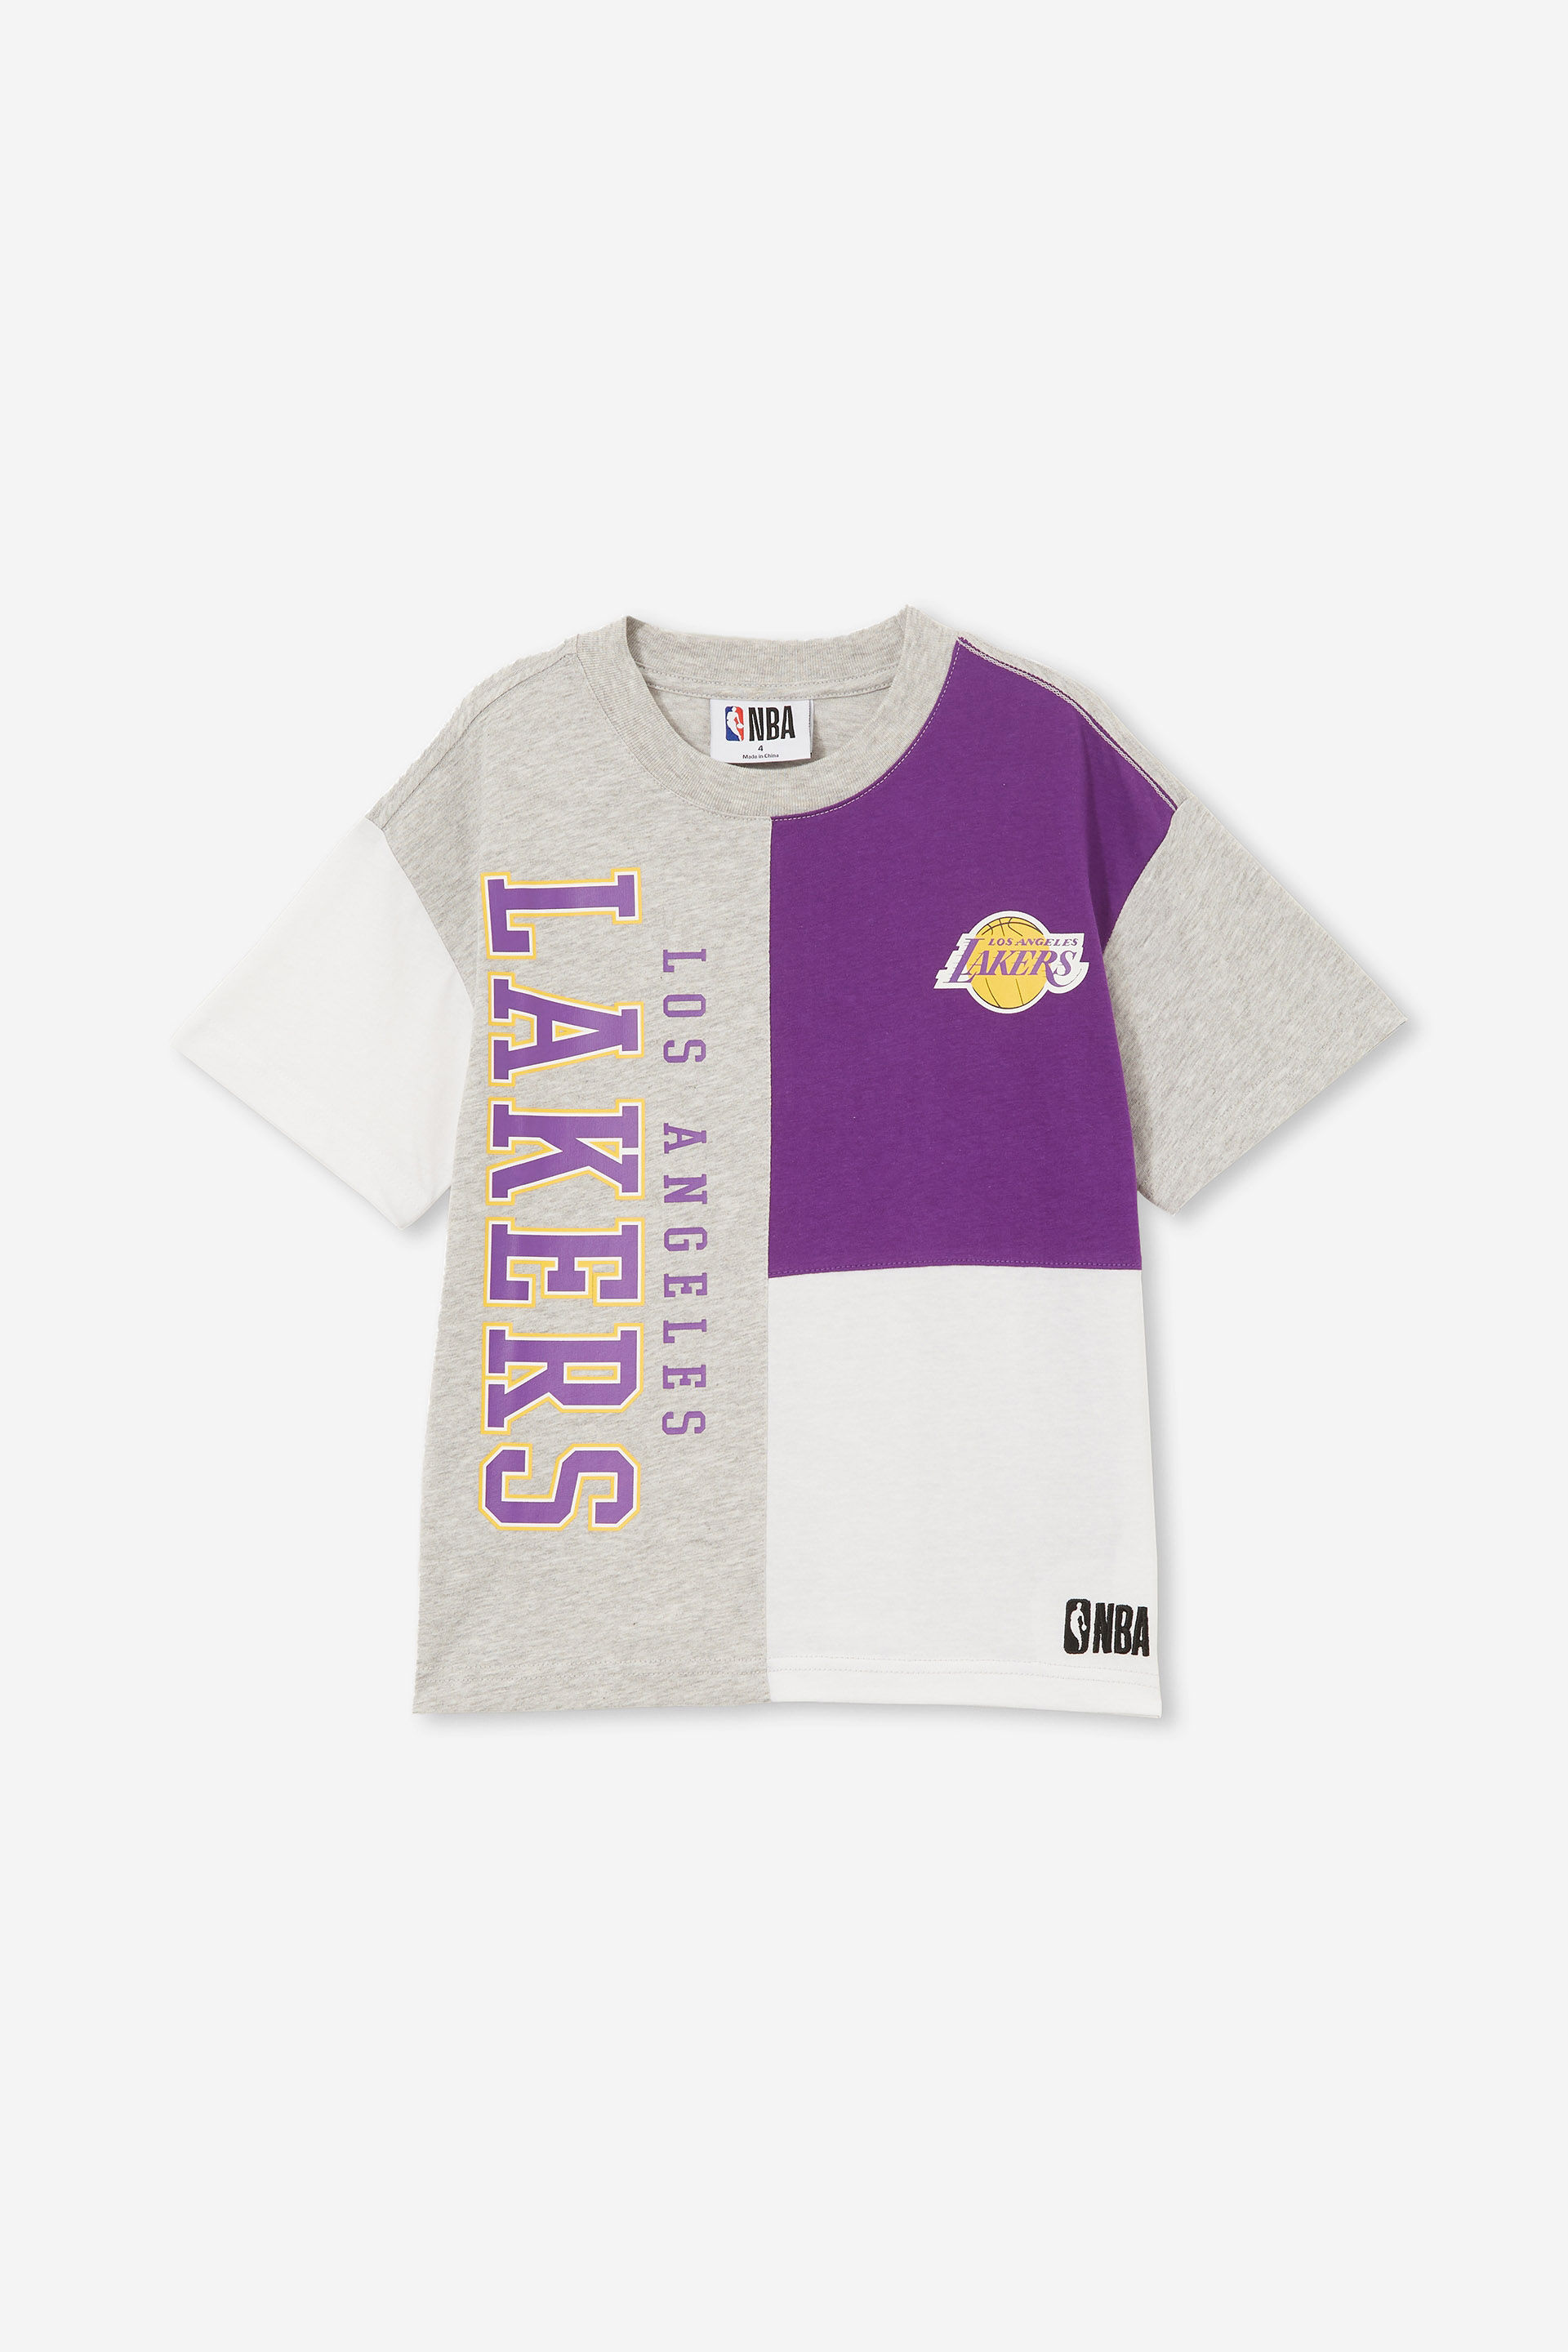 Los Angeles Lakers Youth XL Purple Mickey Mouse T-Shirt, Old Navy